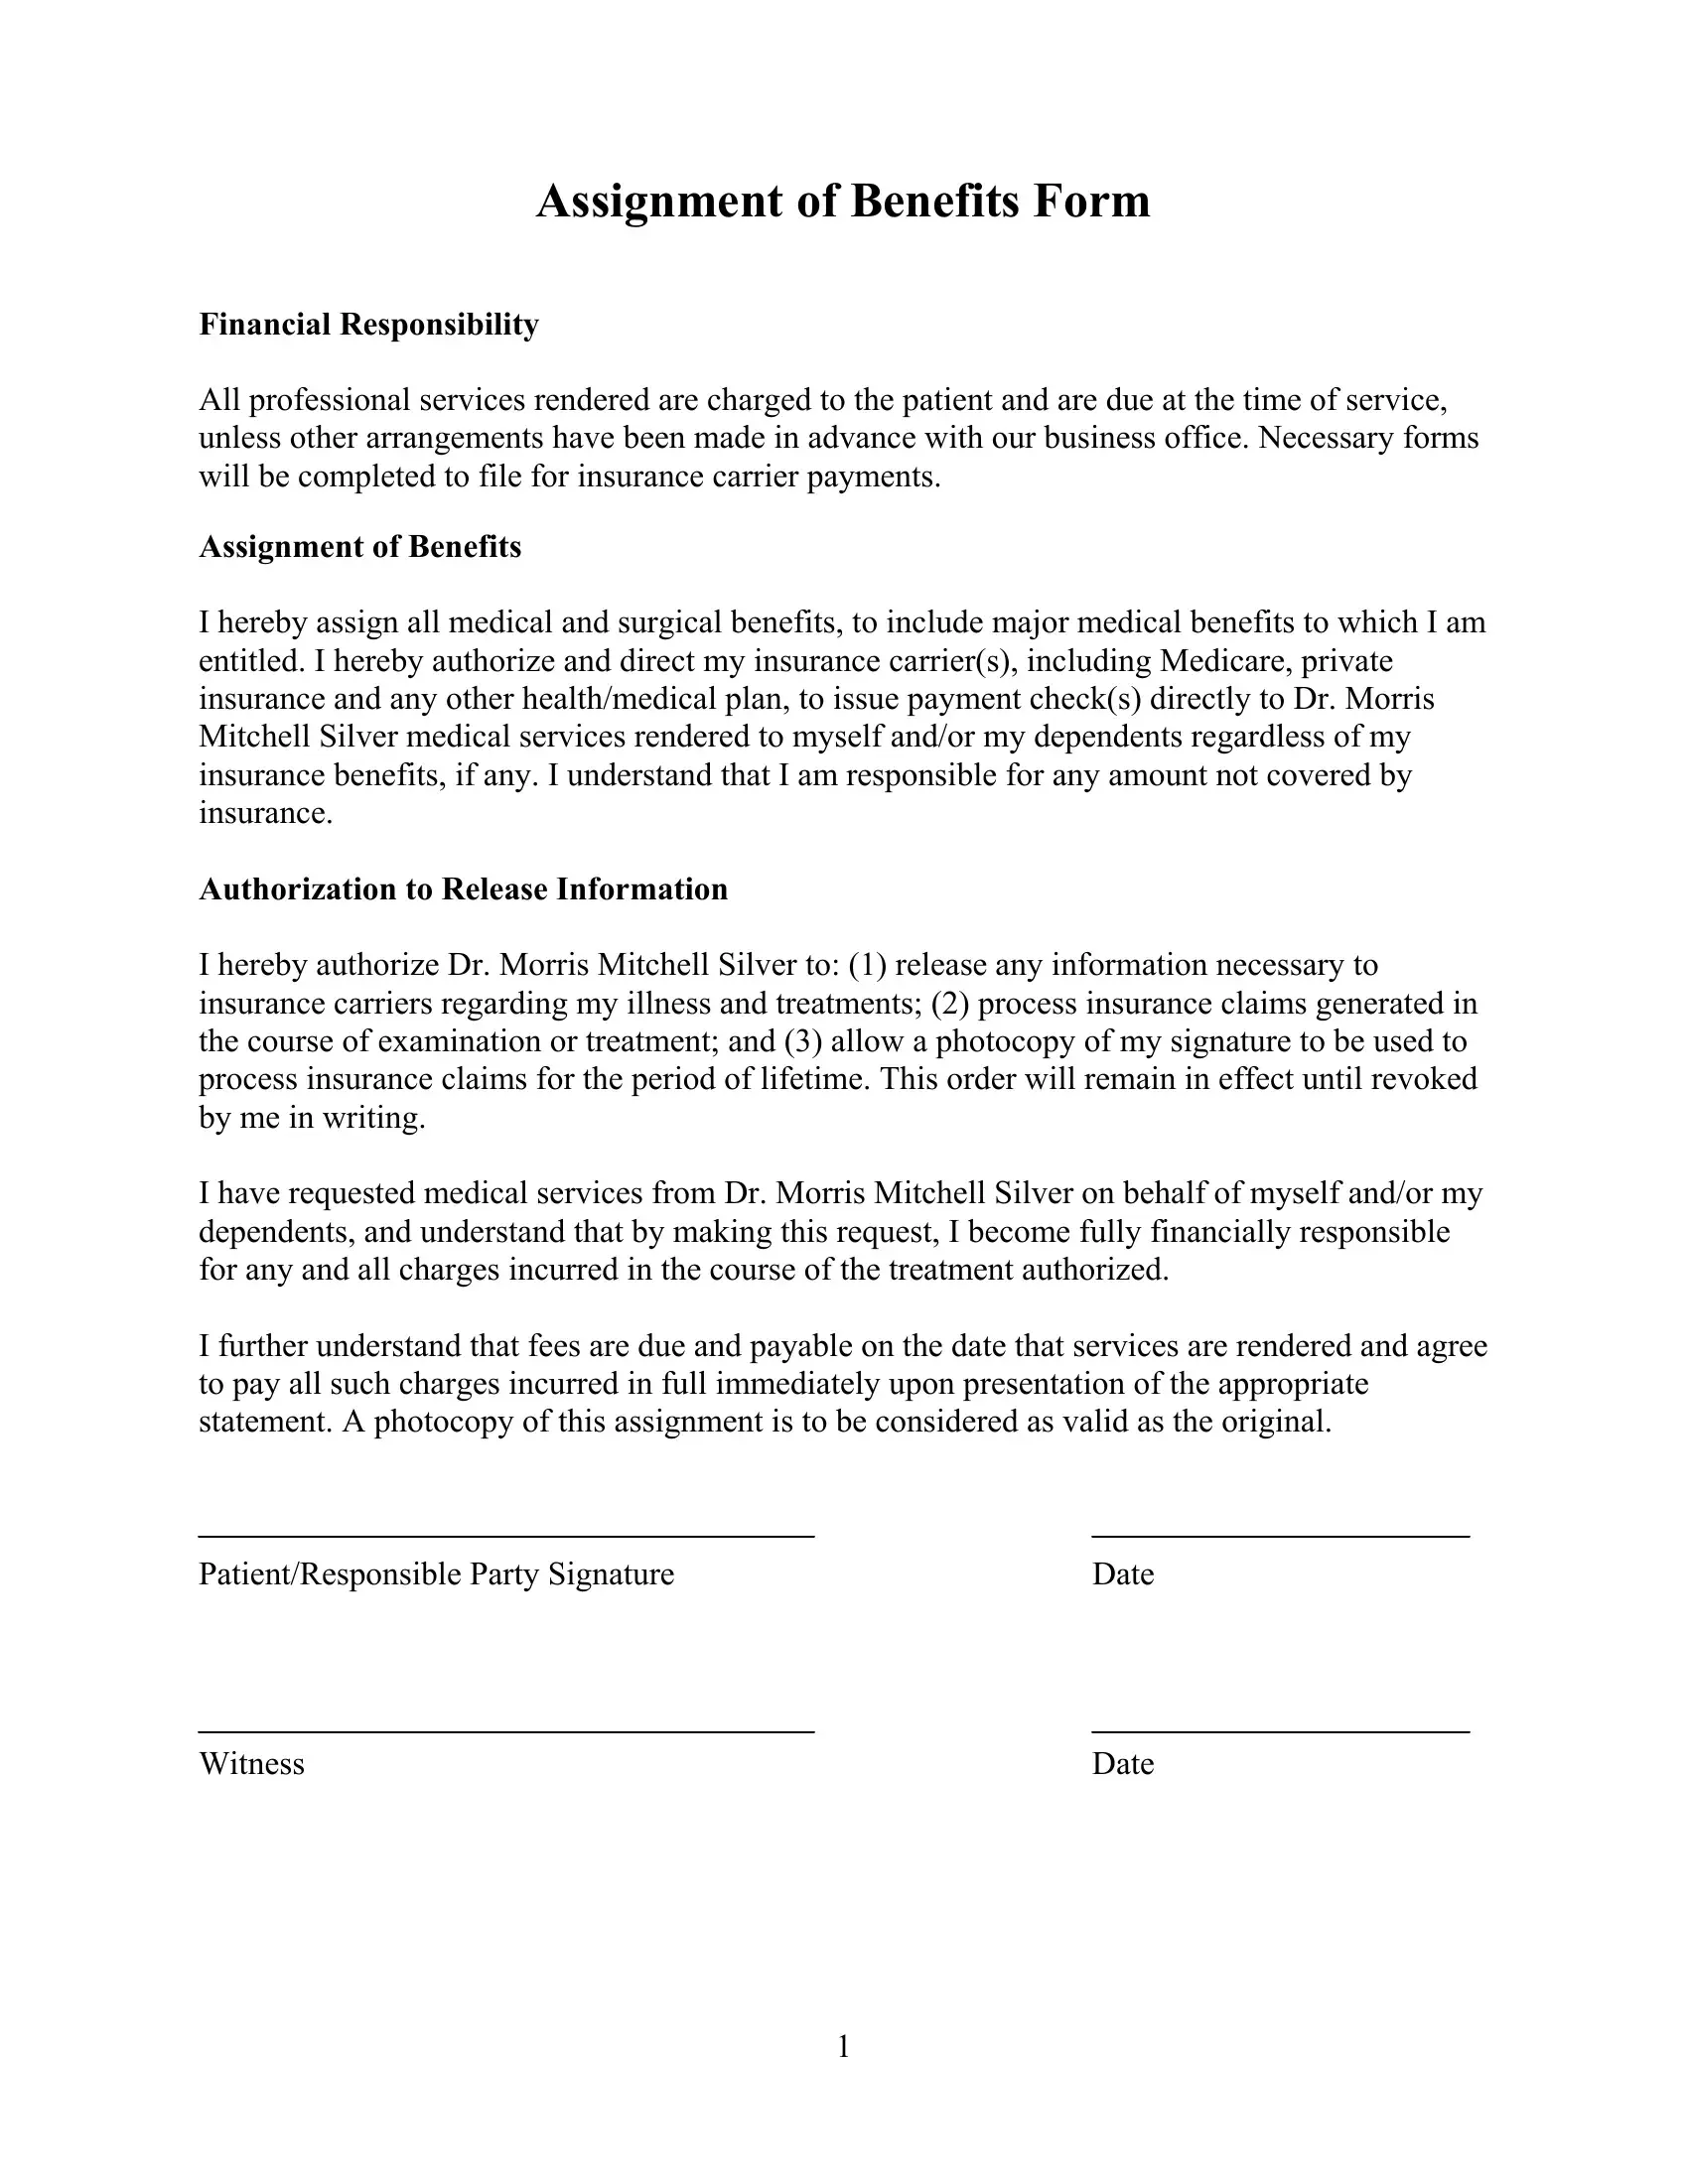 sample assignment of benefits form